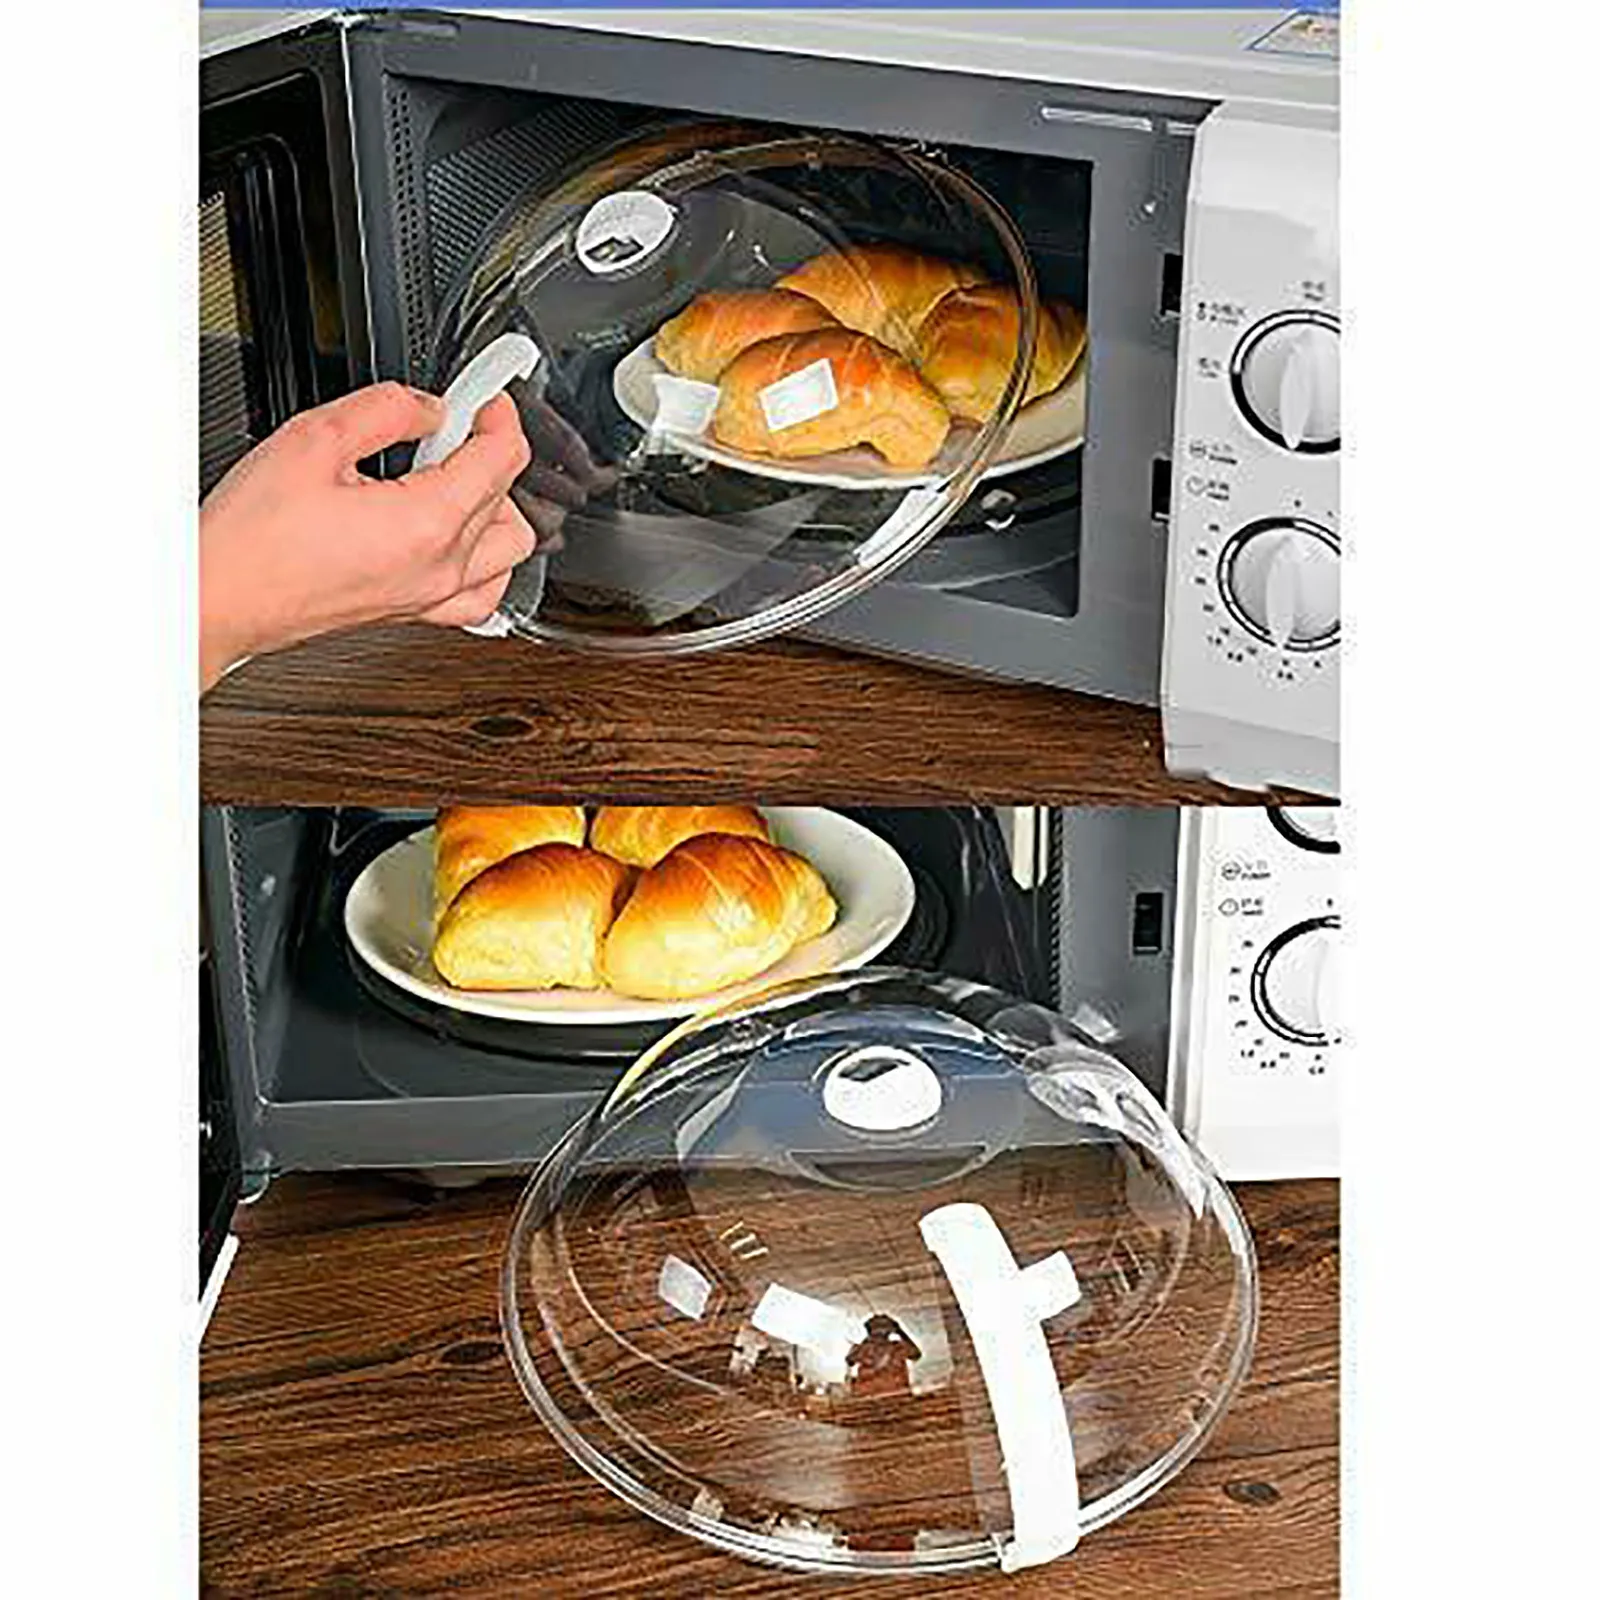 https://ae01.alicdn.com/kf/S9ef6bf64e3f84775b0872d6061e88d47c/Microwave-Splatter-Cover-Microwave-Cover-for-Foods-BPA-Free-Microwave-Plate-Cover-Guard-Lid-with-Adjustable.jpg